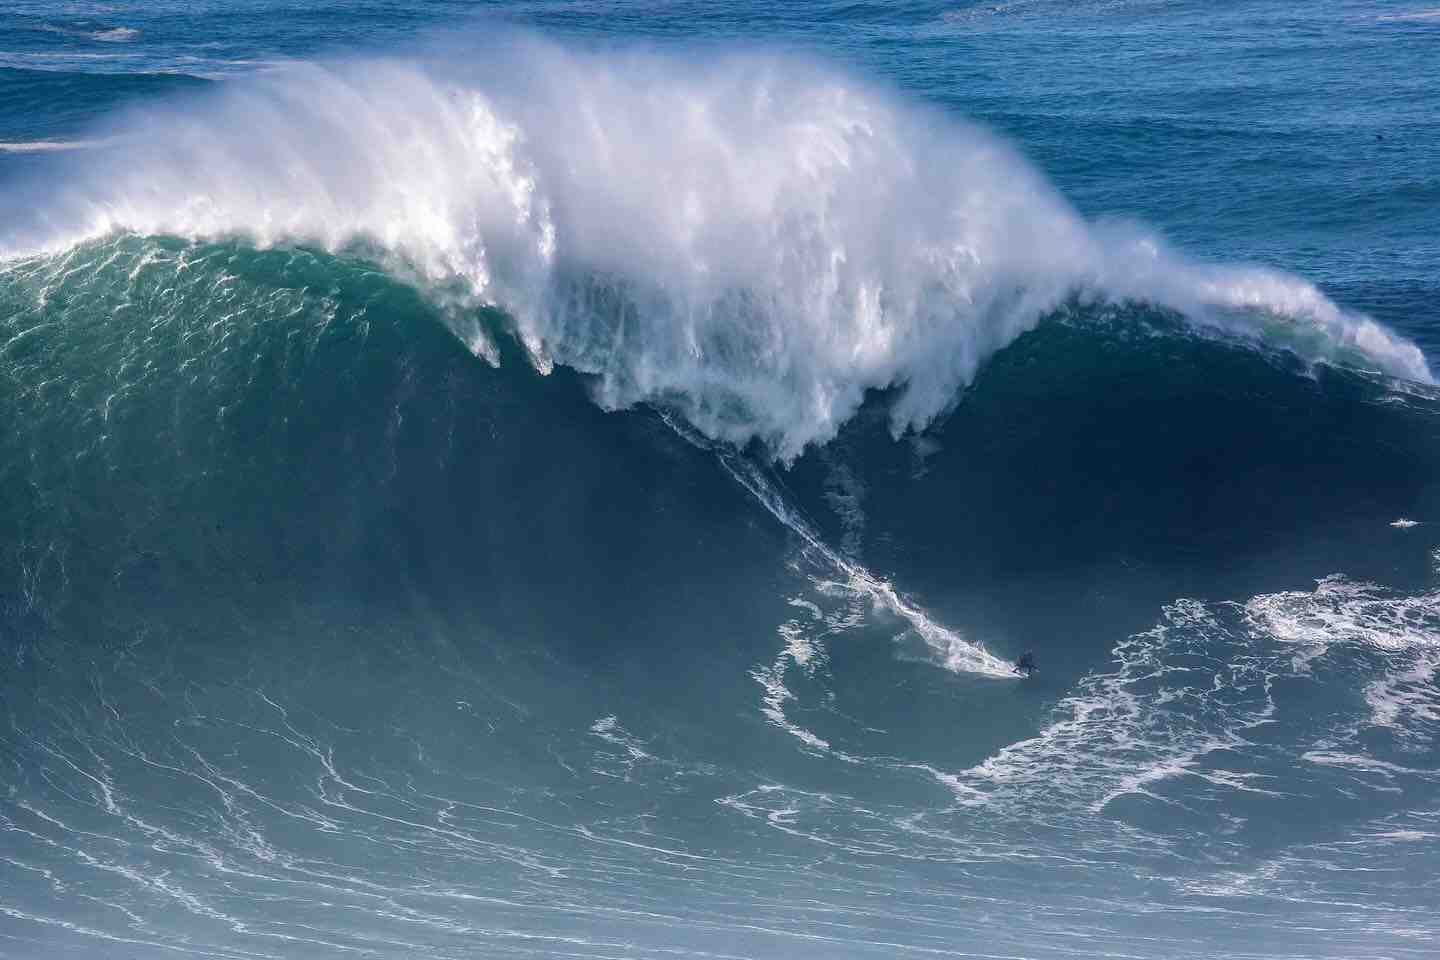 How tall do waves get in Hawaii?